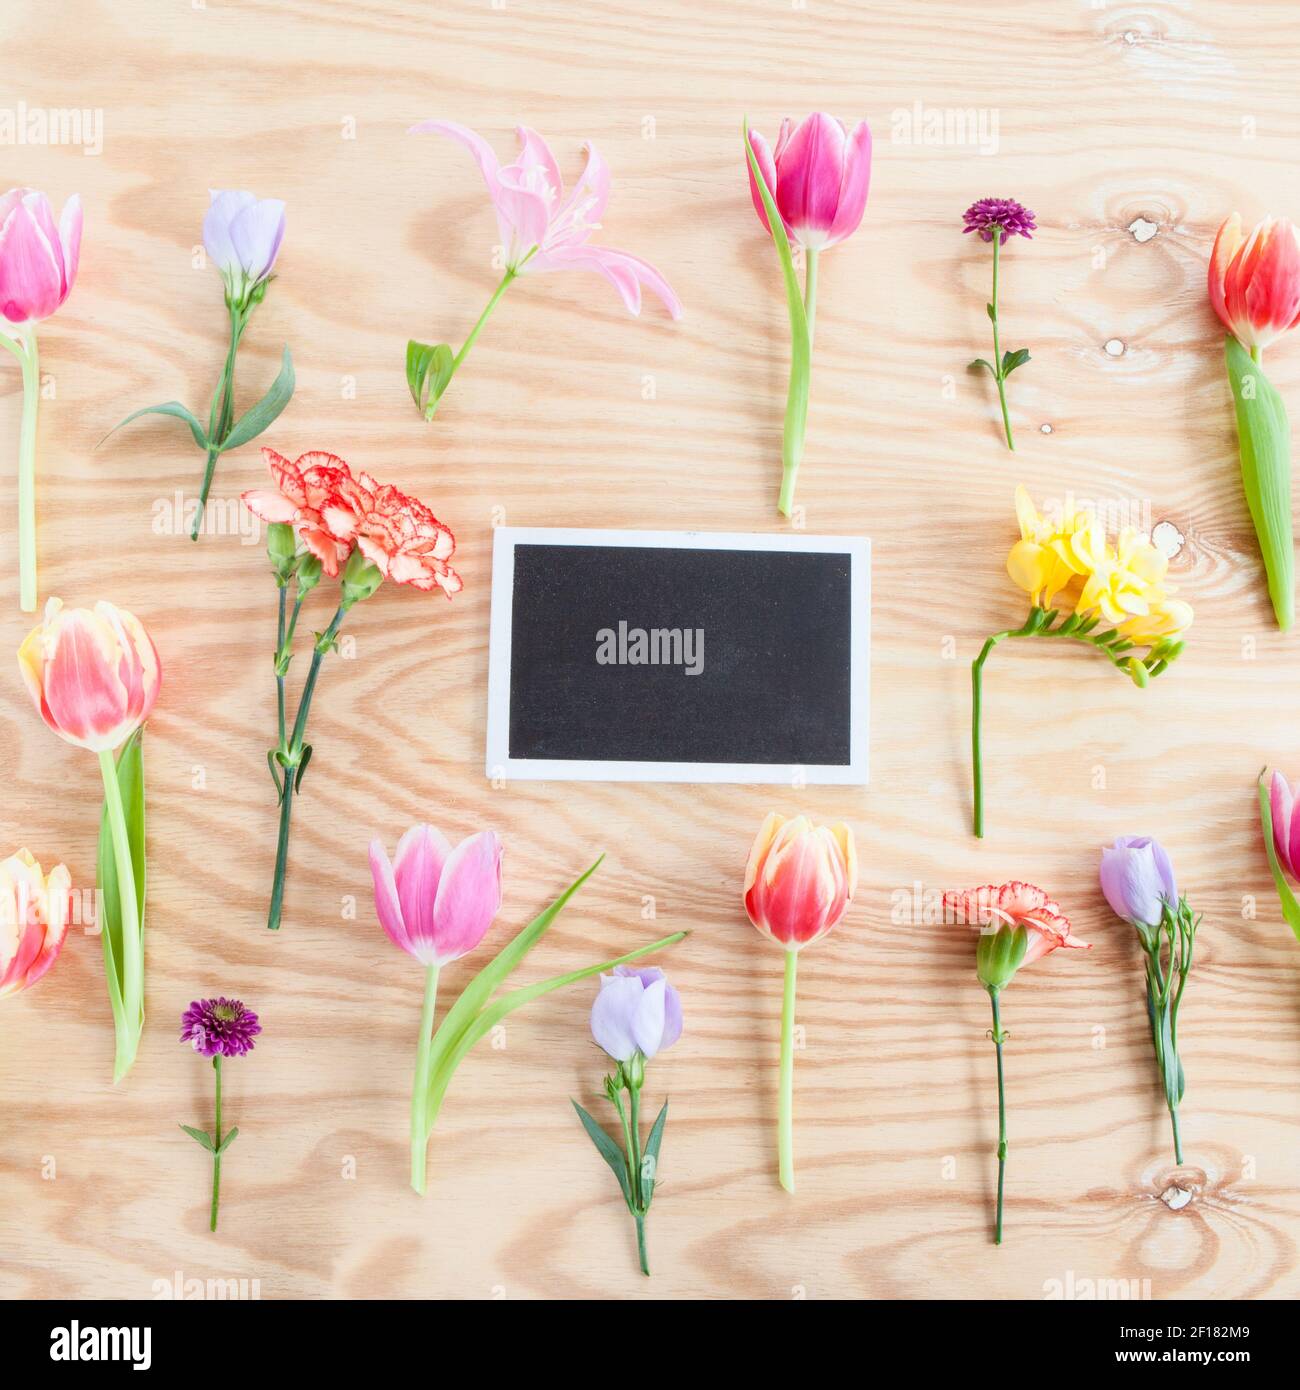 Mixed flowers on wooden background Stock Photo